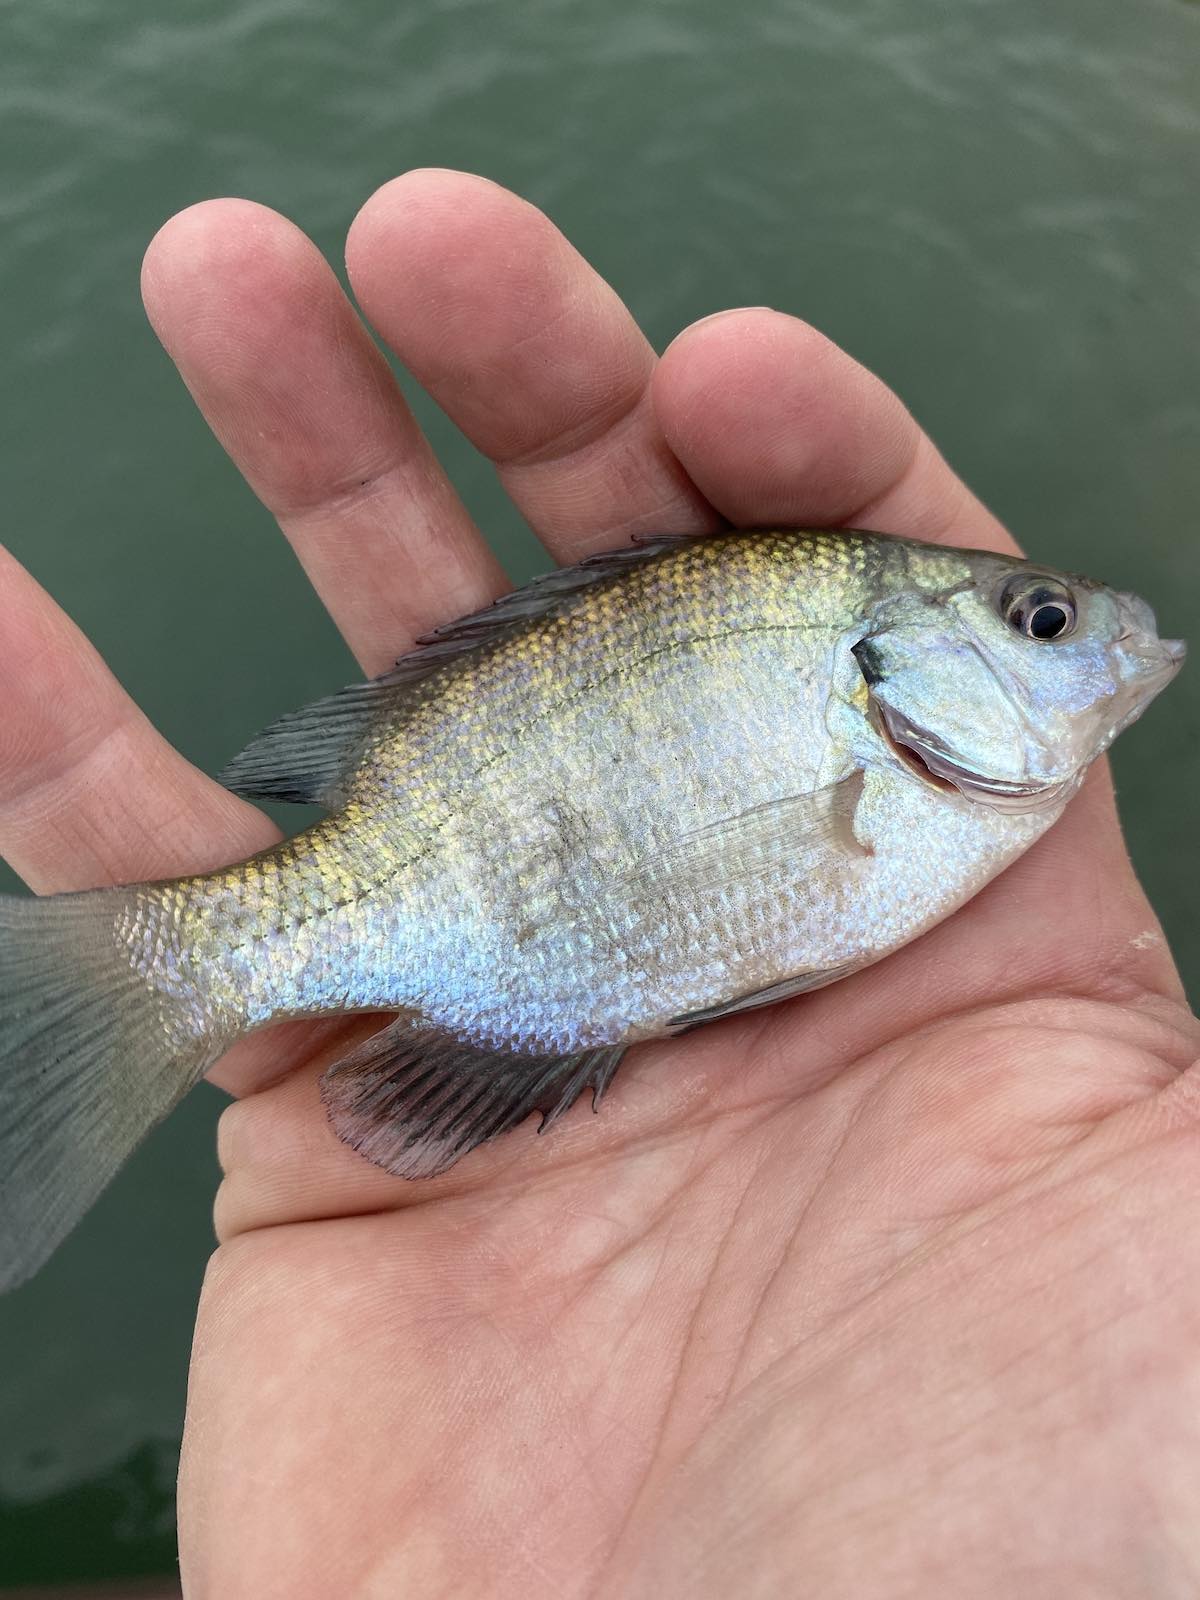 Female bluegill sunfish caught on fly in pond